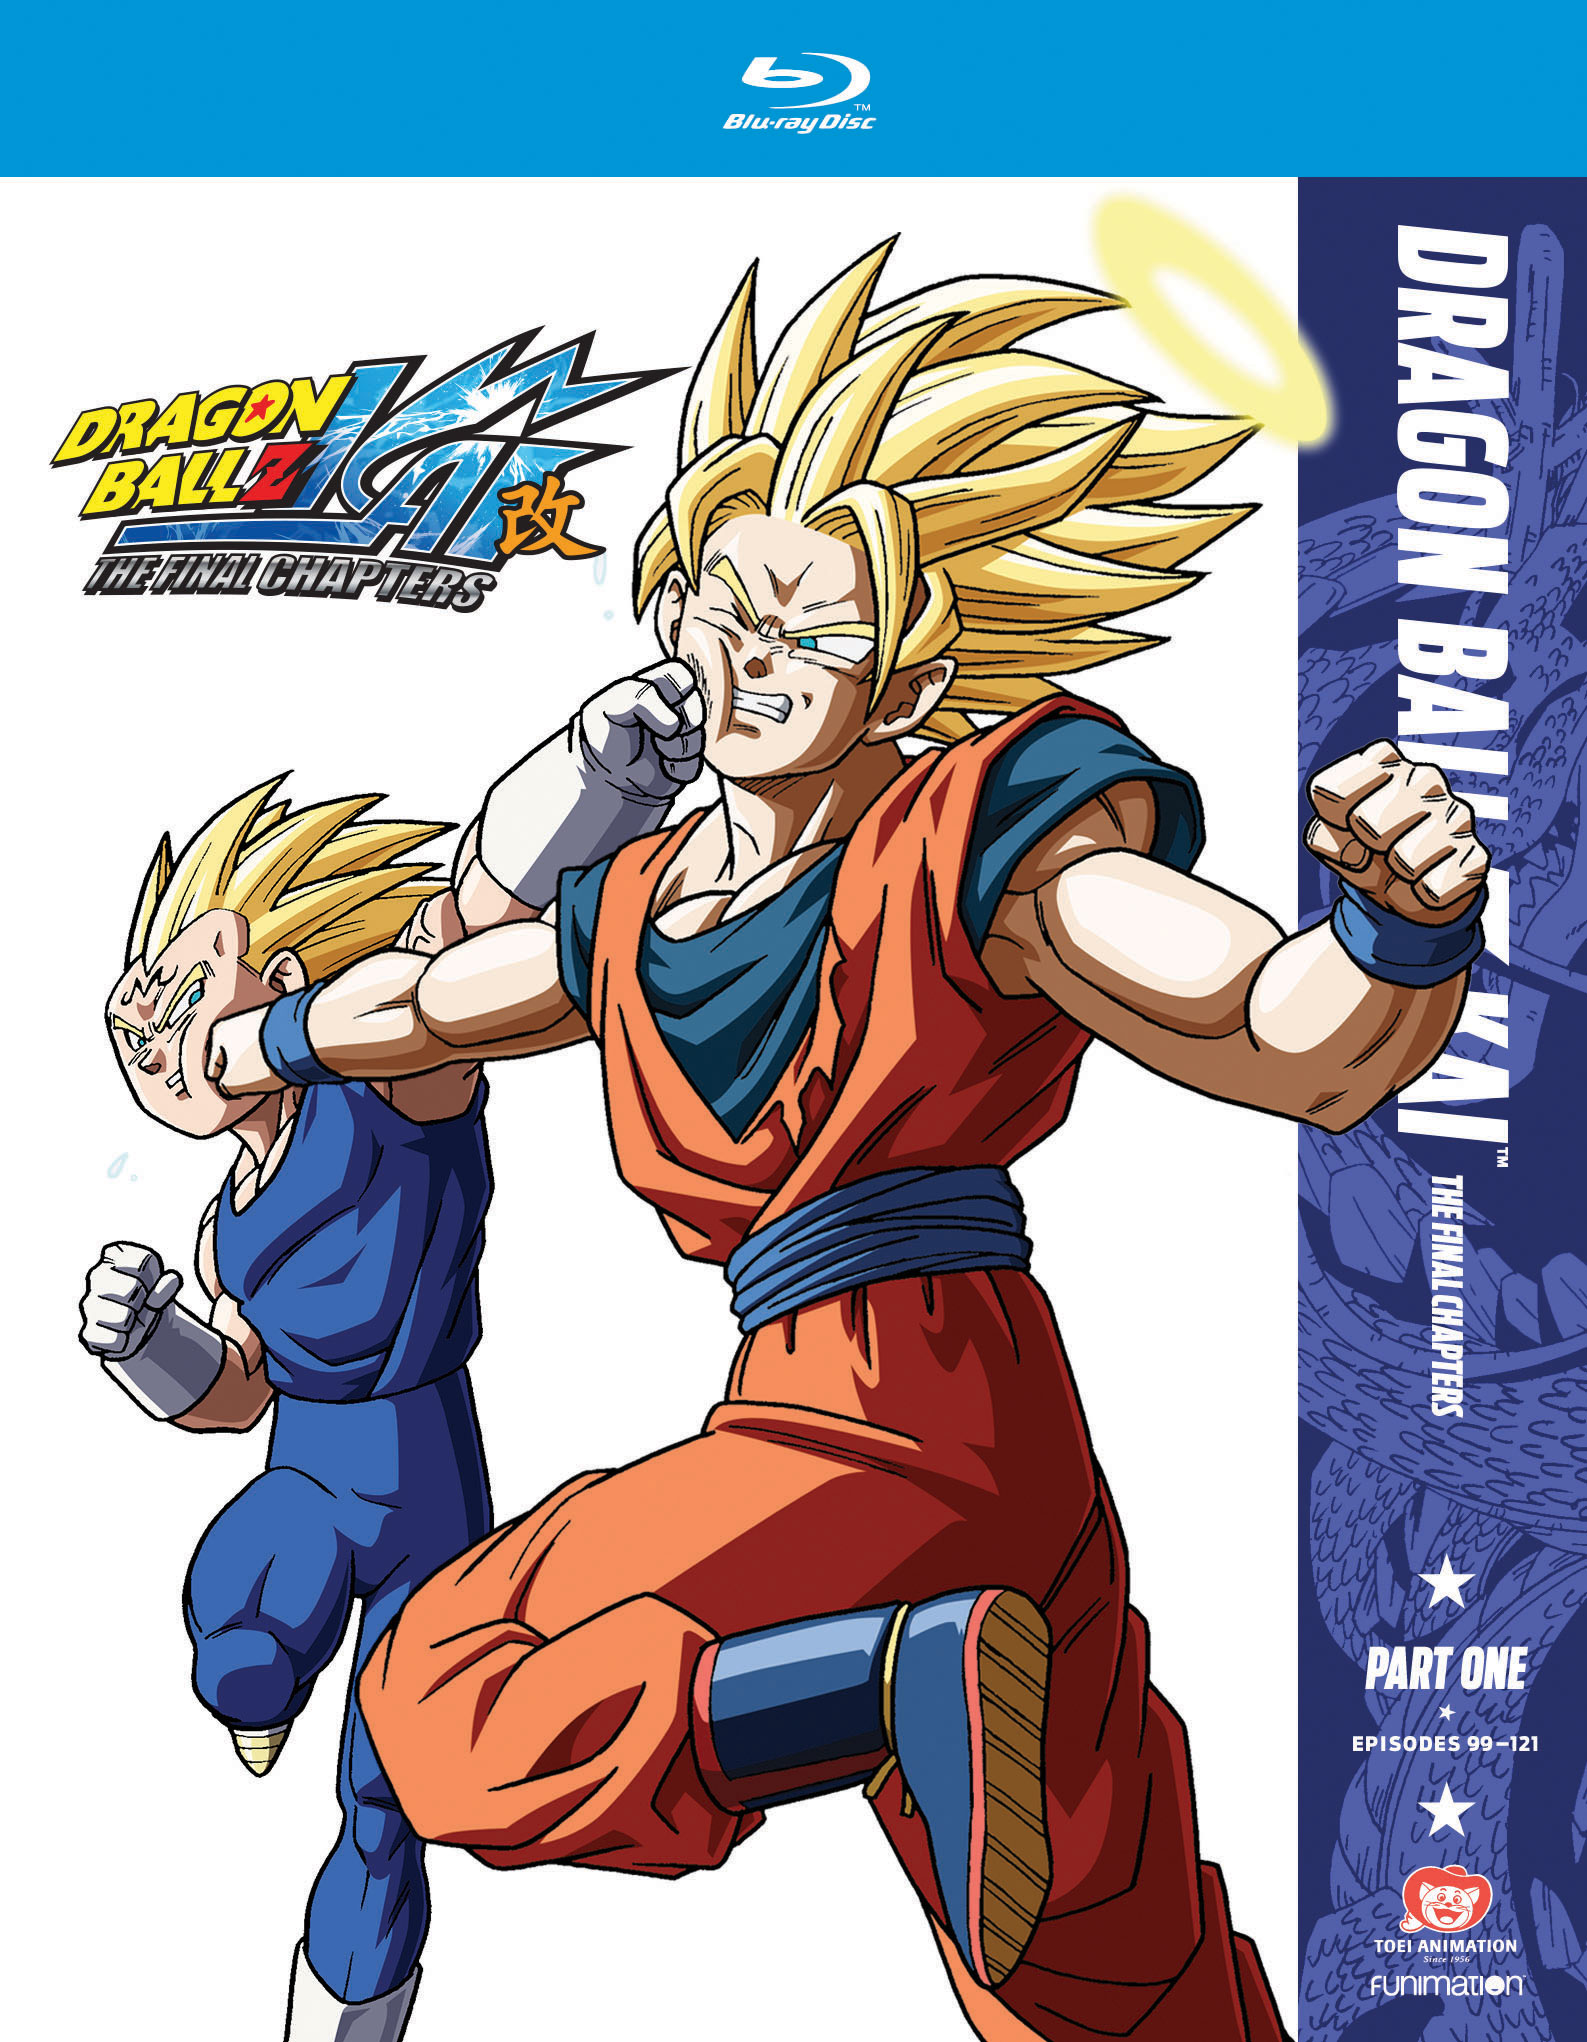 Dragon Ball Z DVD Movies 5 & 6 Sold Out